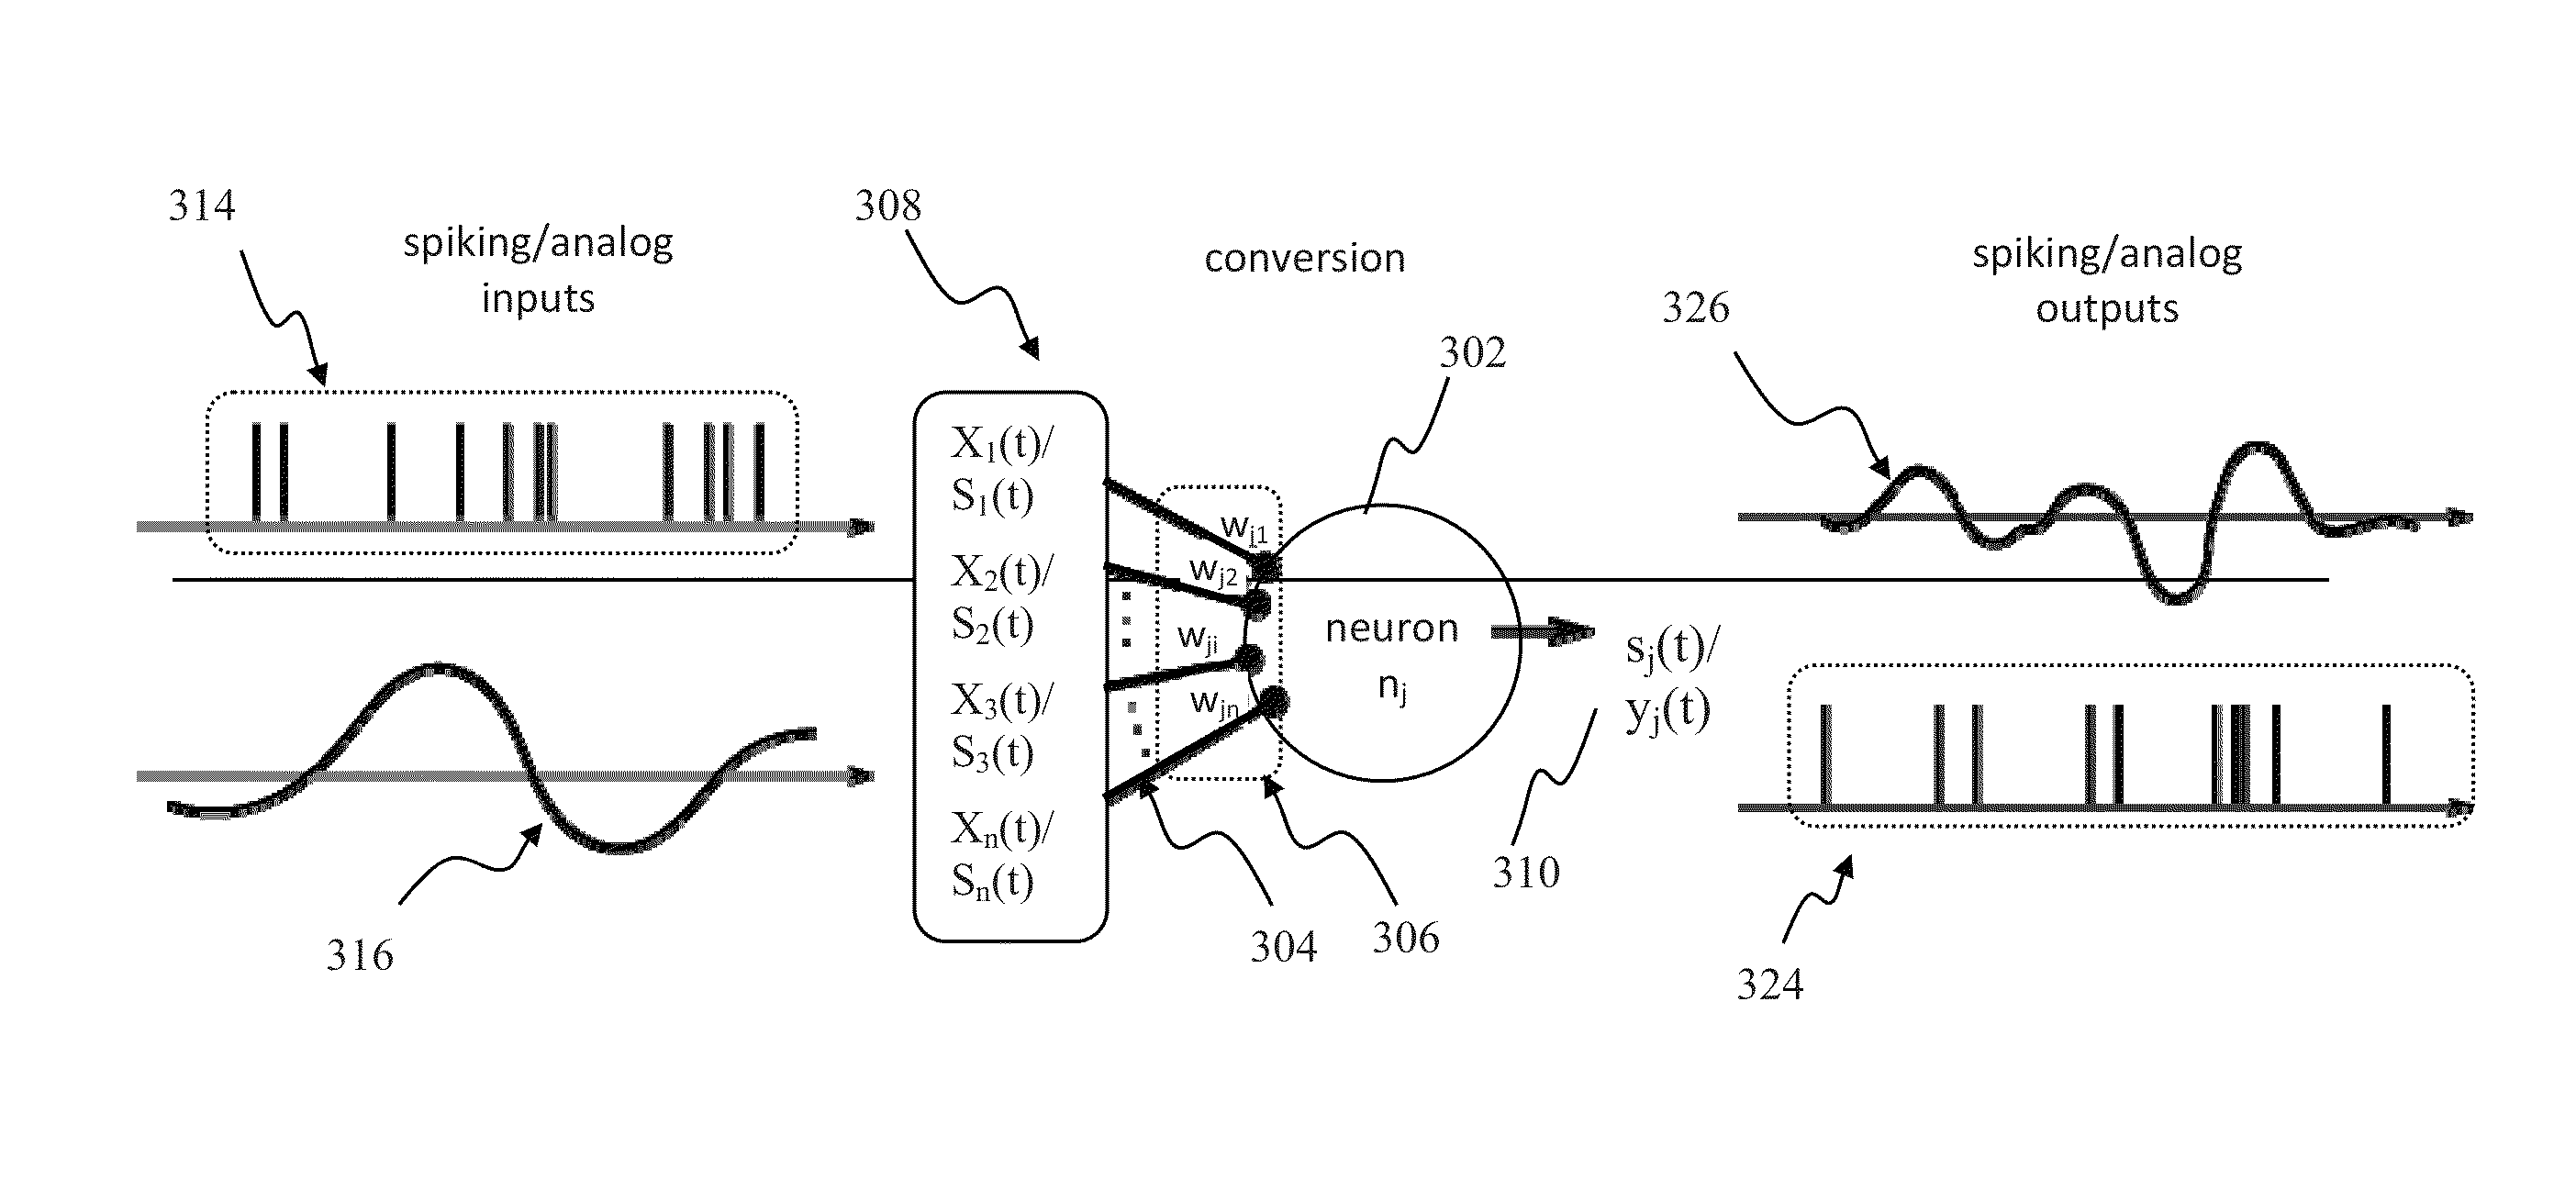 Apparatus and methods for gating analog and spiking signals in artificial neural networks